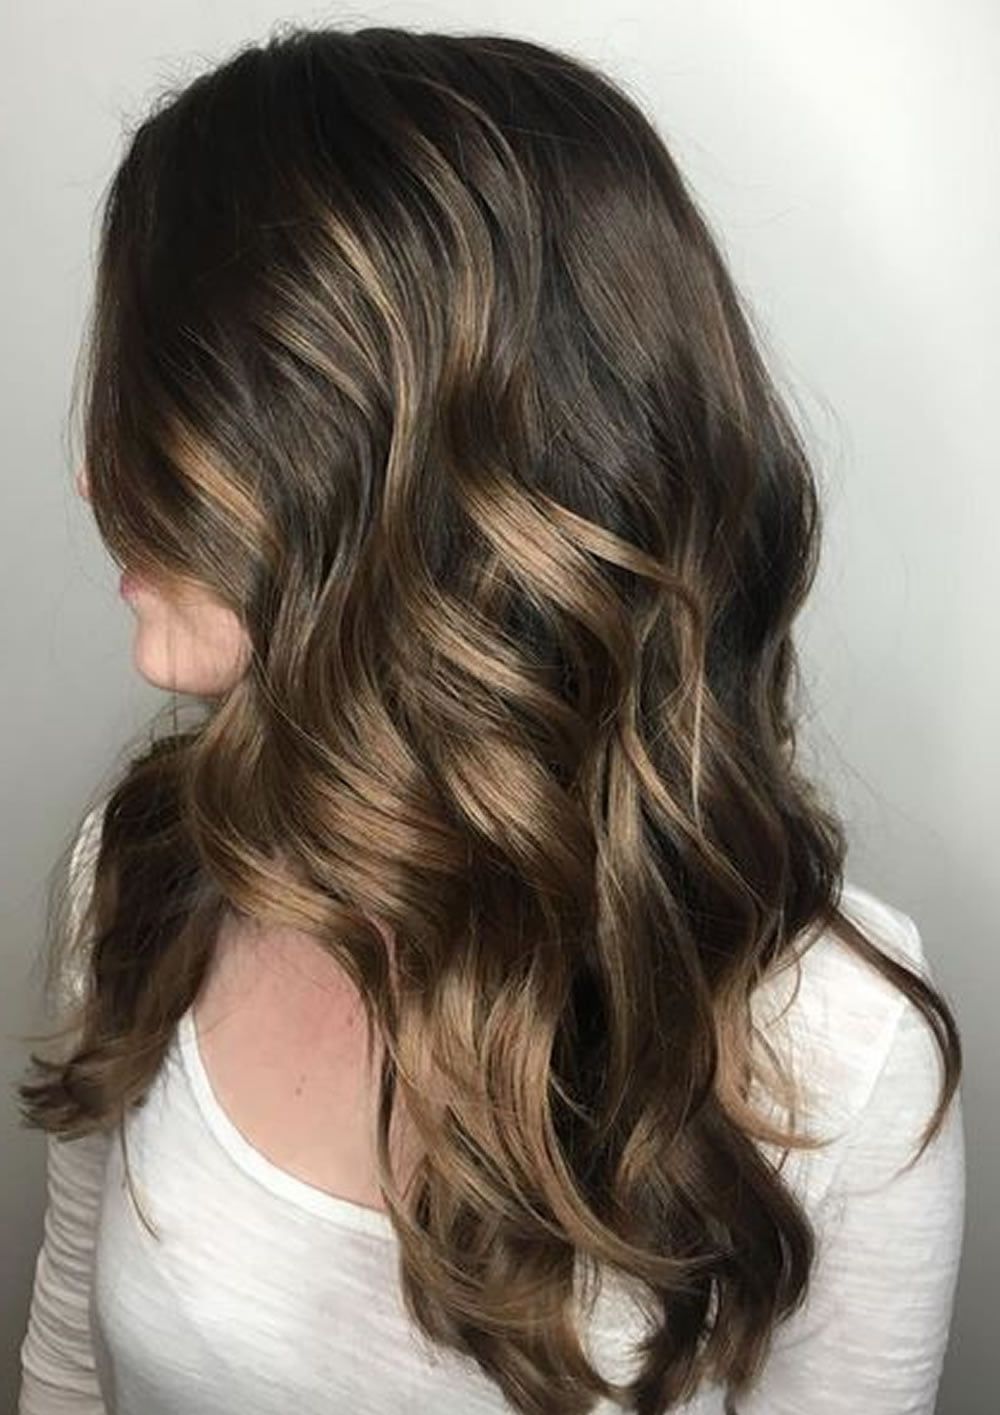 Balayage Ombre Highlights 2021: Dark, Brunette, Blonde Etc Throughout Ash Blonde Balayage Ombre On Dark Hairstyles (View 7 of 20)